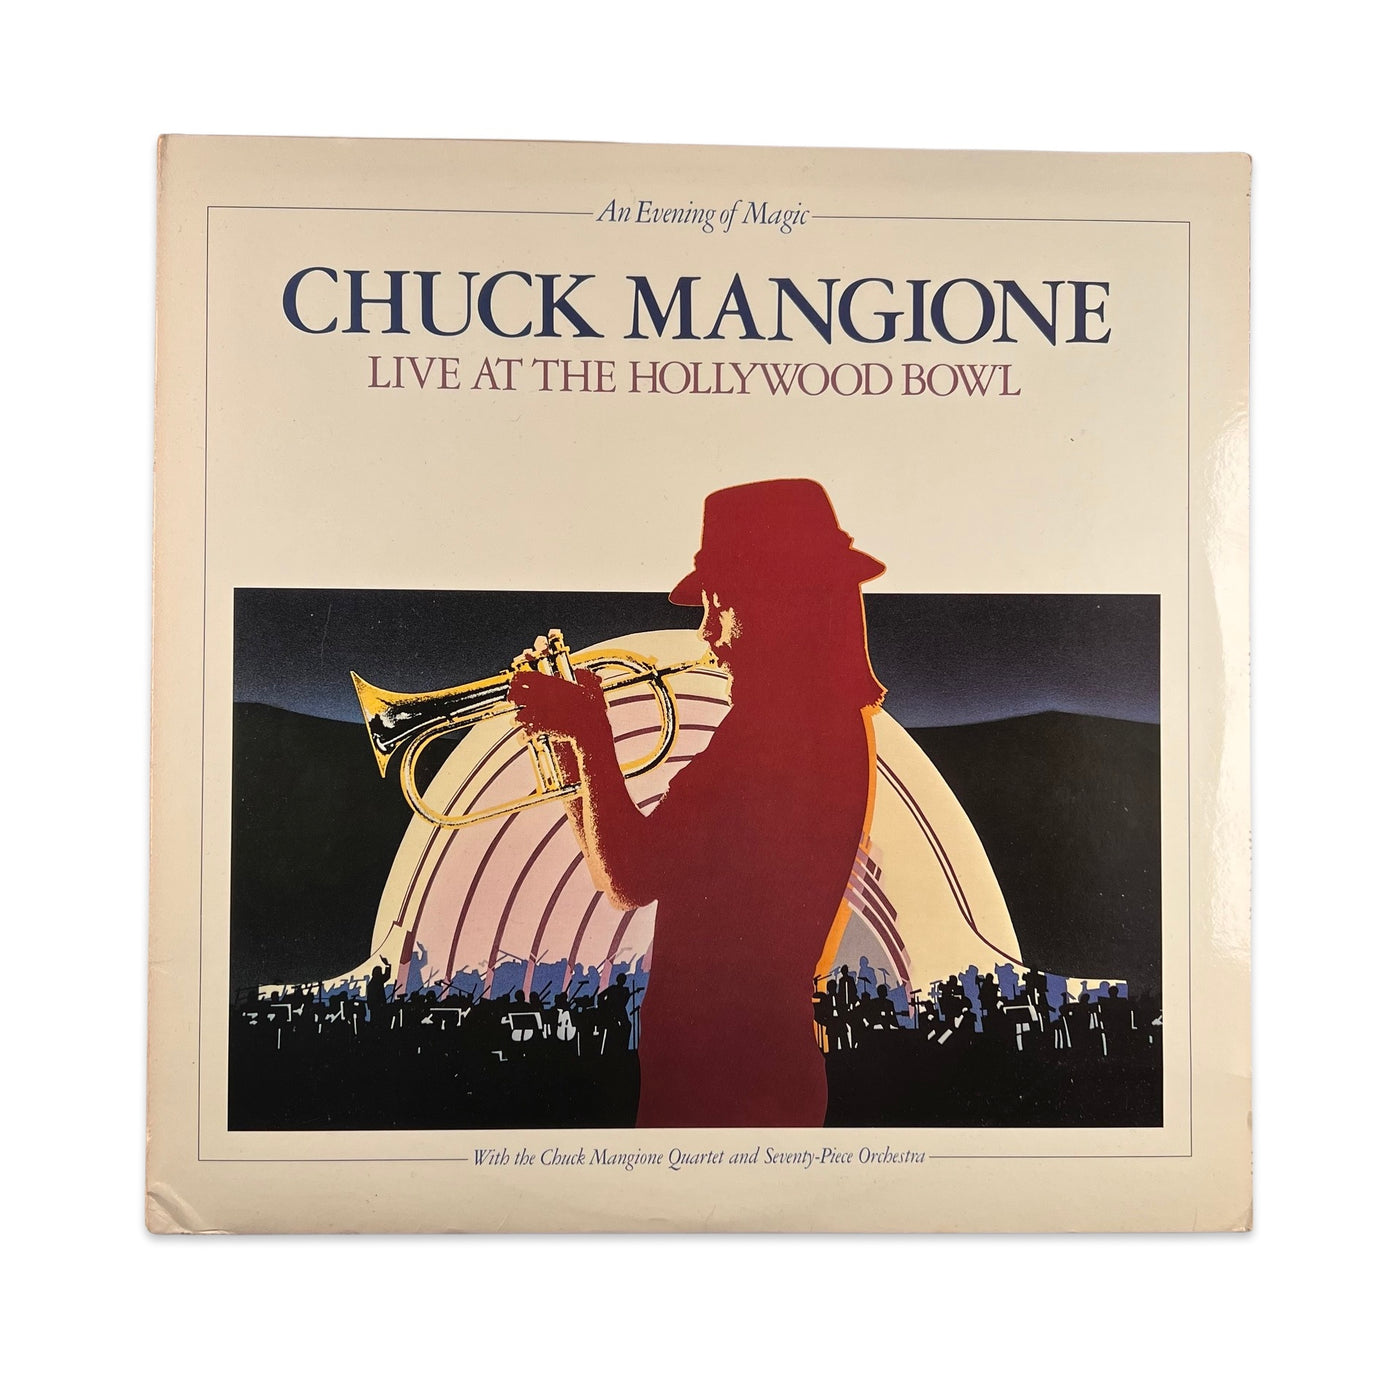 Chuck Mangione – Live At The Hollywood Bowl (An Evening Of Magic)